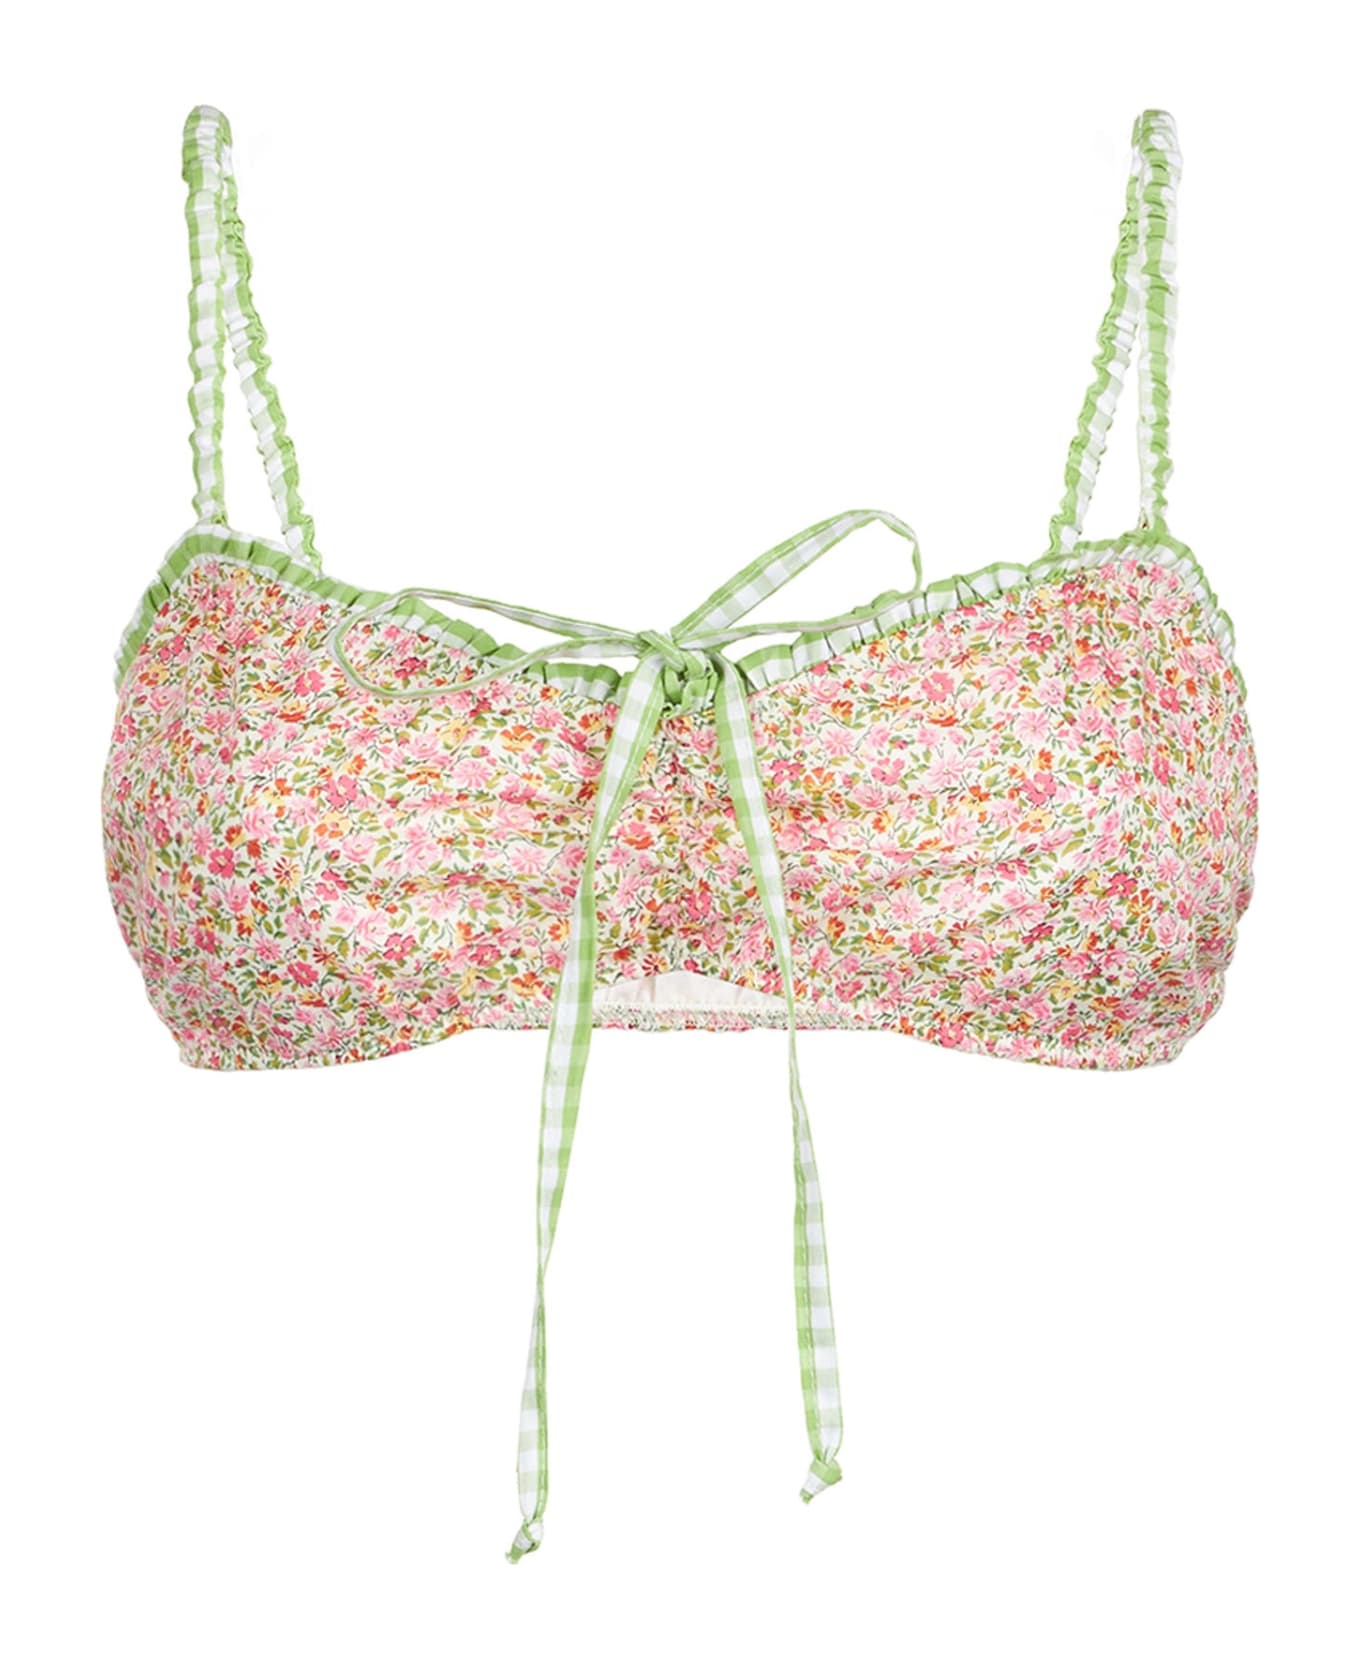 MC2 Saint Barth Top Bralette Swimsuit With Liberty Print | Made With Liberty Fabric - GREEN ブラジャー